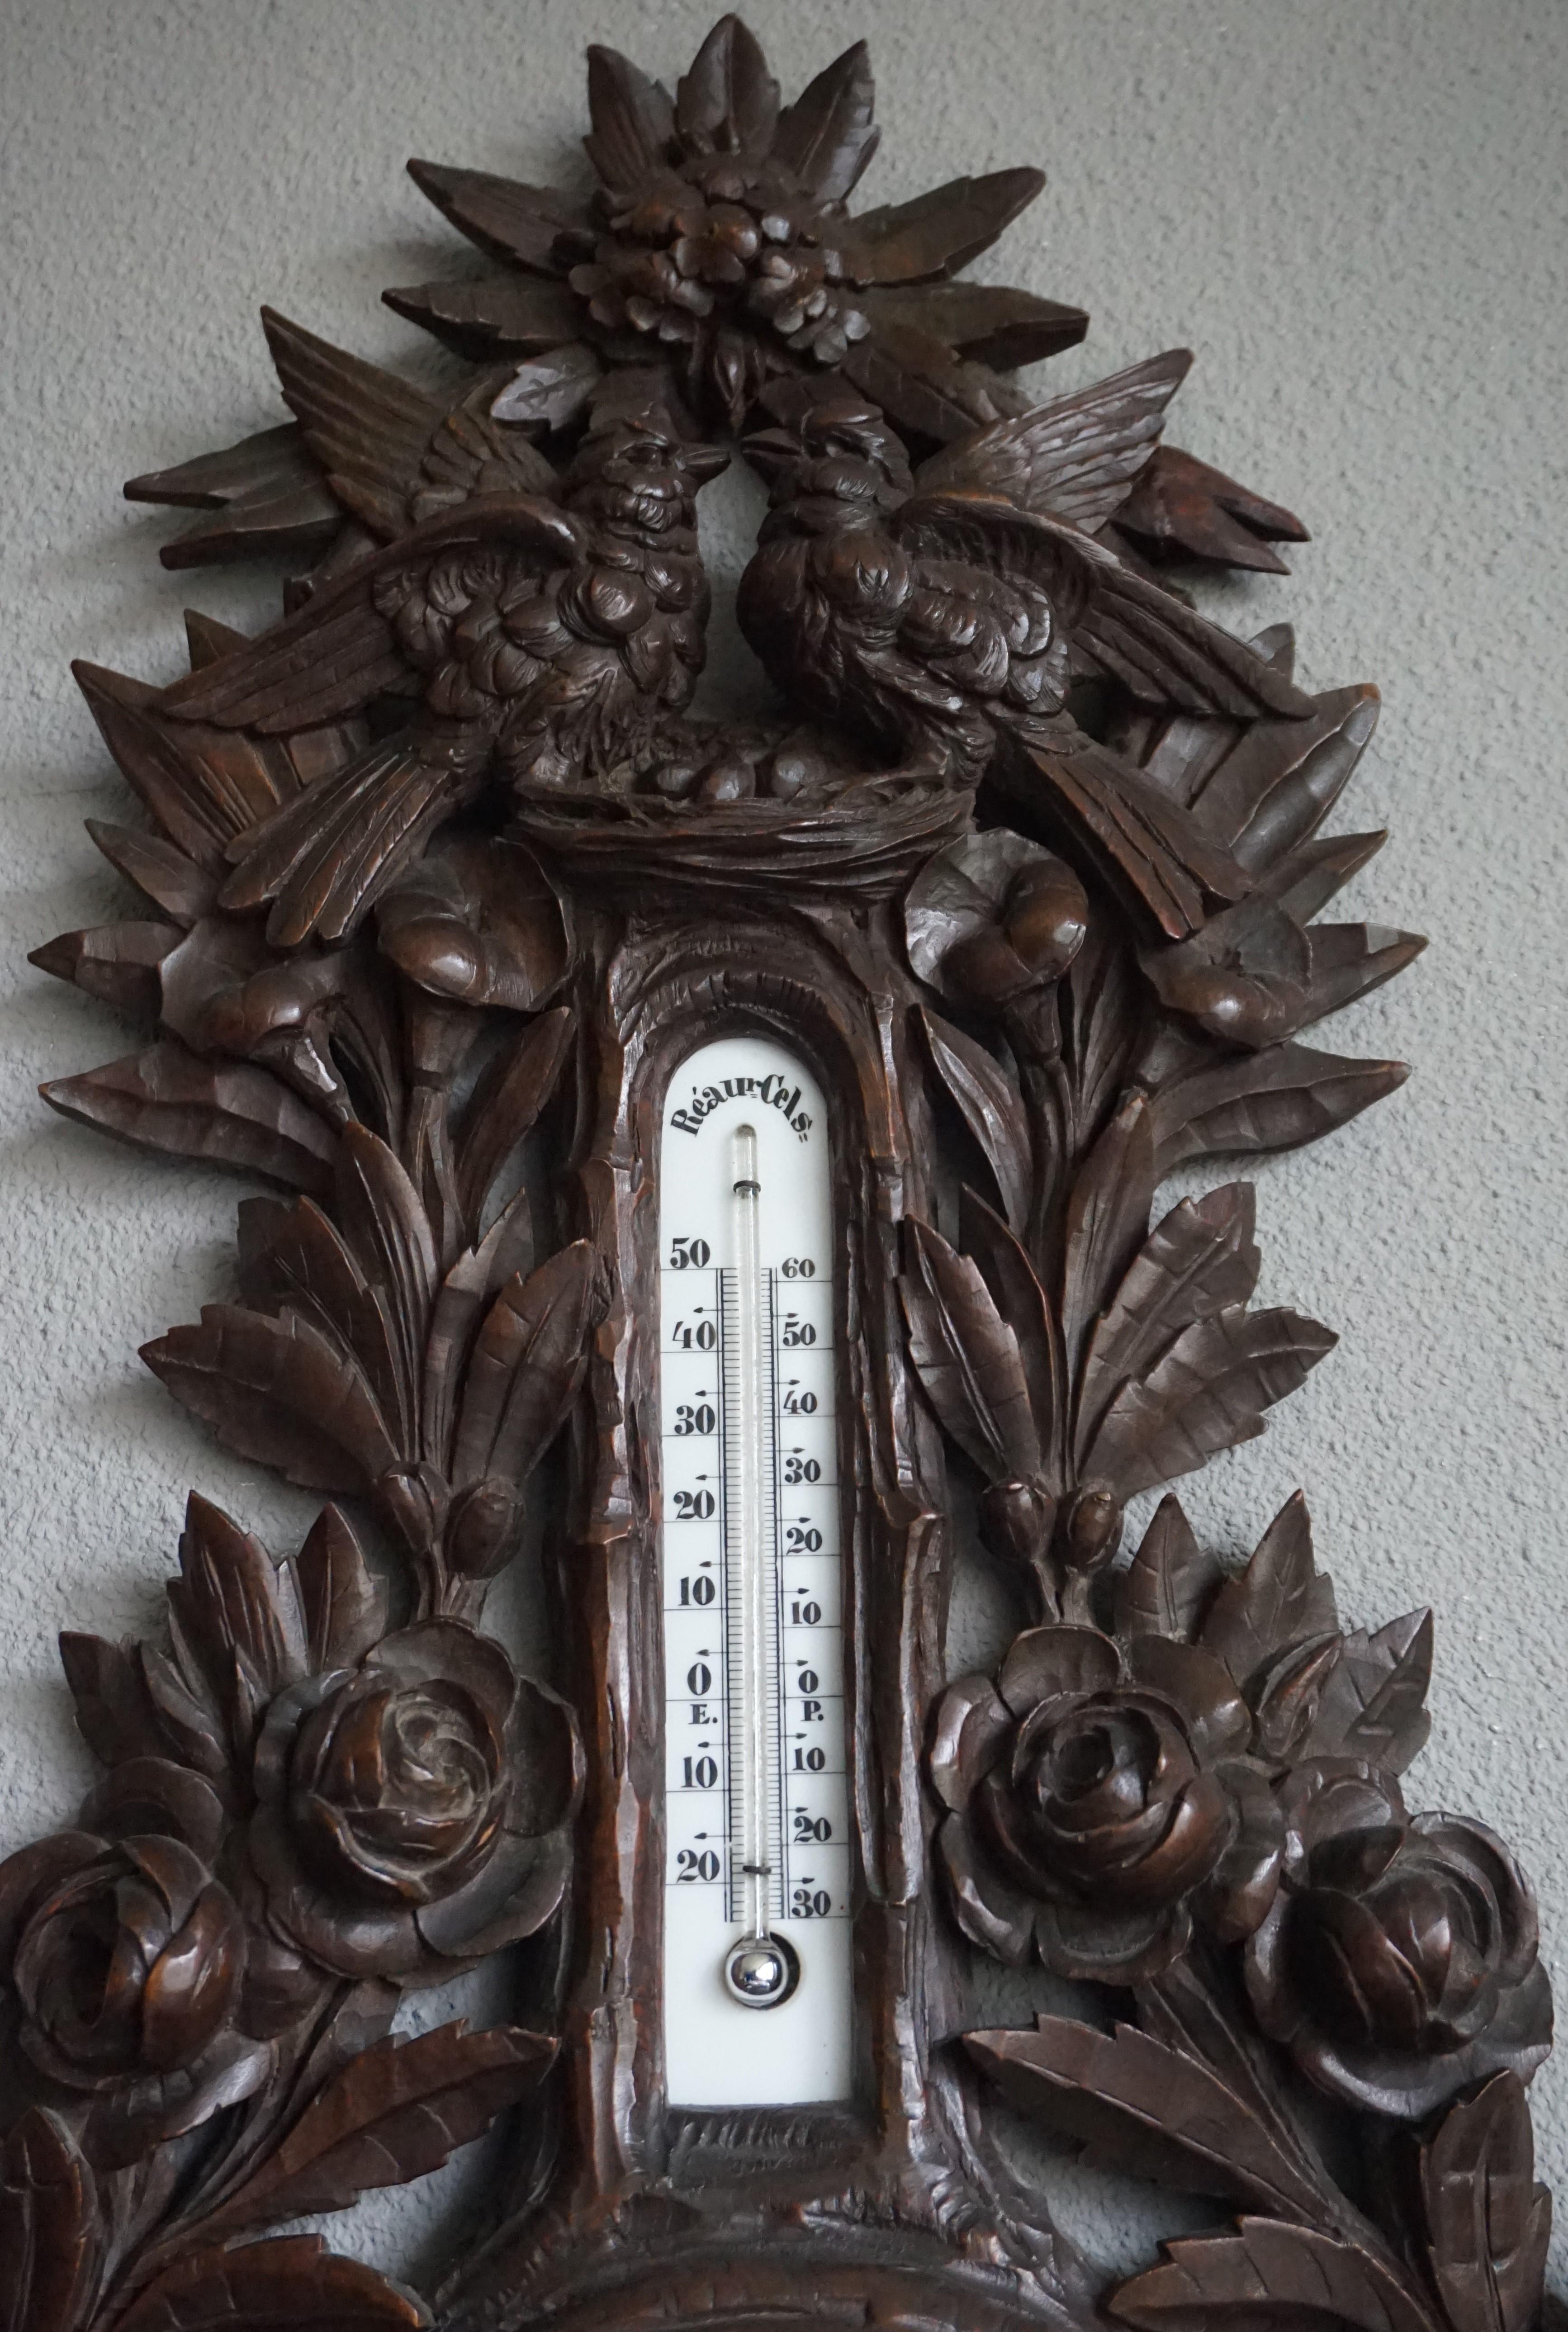 Large and wonderful, Swiss Black Forest barometer with thermometer.

This mother nature inspired, charming and beautifully hand-carved barometer displays the quality of the craftsmanship of Swiss Black Forest artisans around the turn of the century